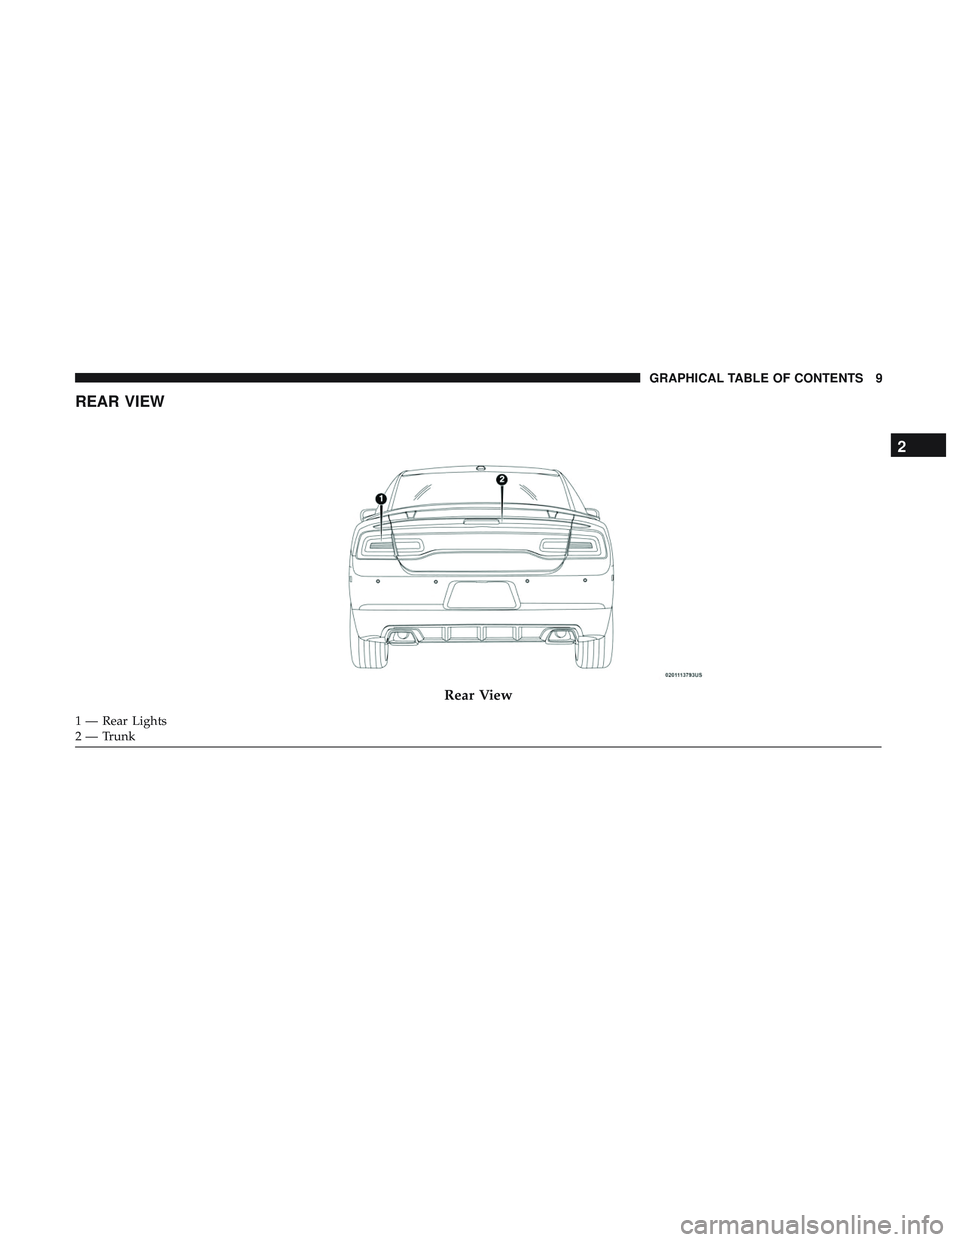 DODGE CHARGER SRT 2018 User Guide REAR VIEW
Rear View
1 — Rear Lights
2 — Trunk
2
GRAPHICAL TABLE OF CONTENTS 9 